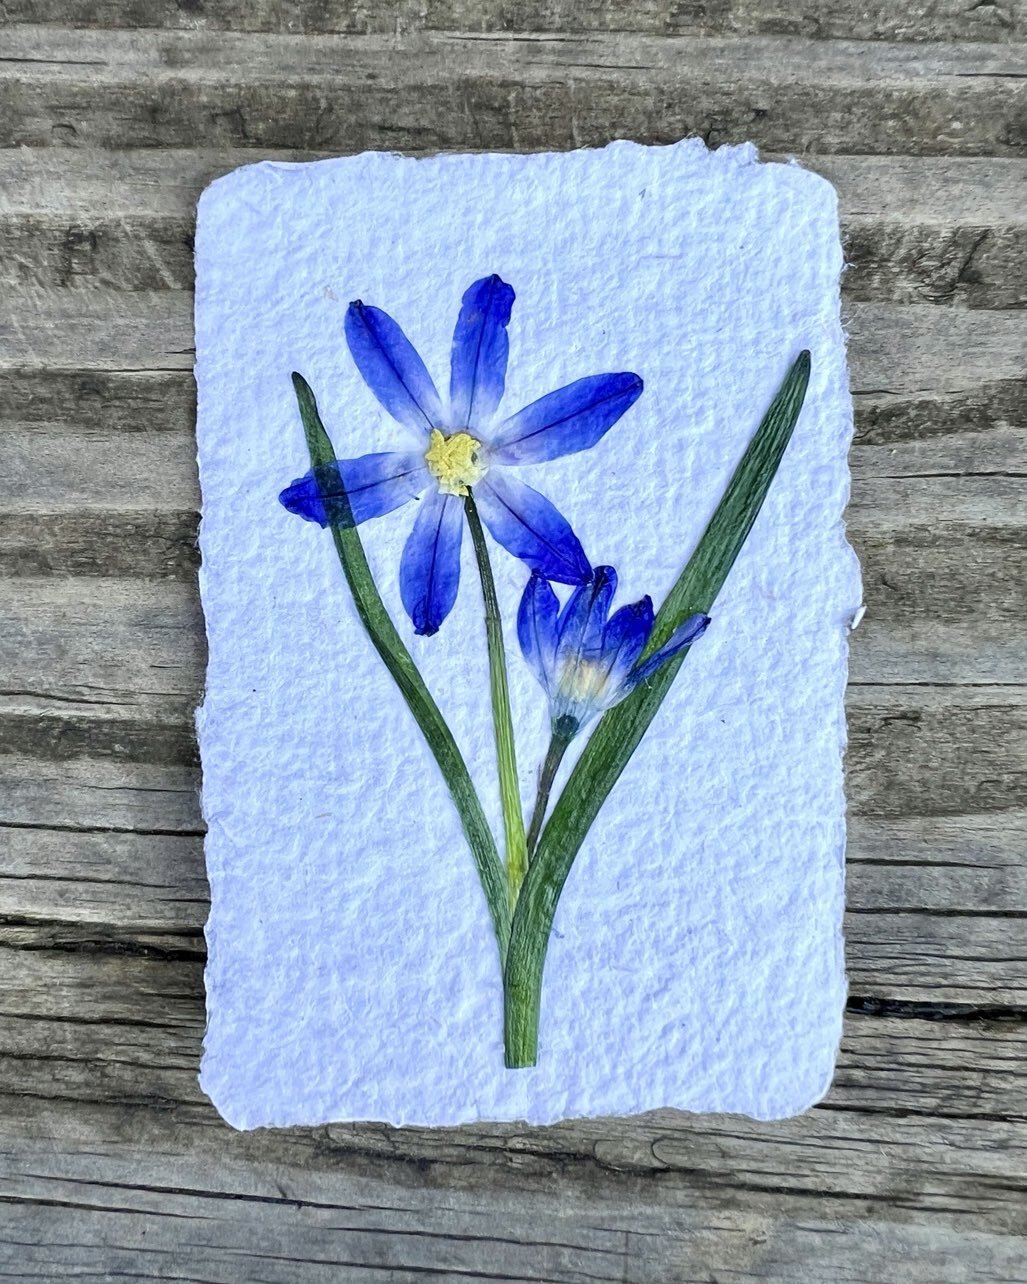 Glory of the Snow on 2x3&rdquo; handmade paper. 
Sealed with a UV and moisture resistant polymer. 
(Tempted to keep this one for myself)

#pressedflowerart
#handmadepaper 
#botanicalart
#deckleedge
#homemadepaper
#pressedflowers
#recycledpaper
#upcyc